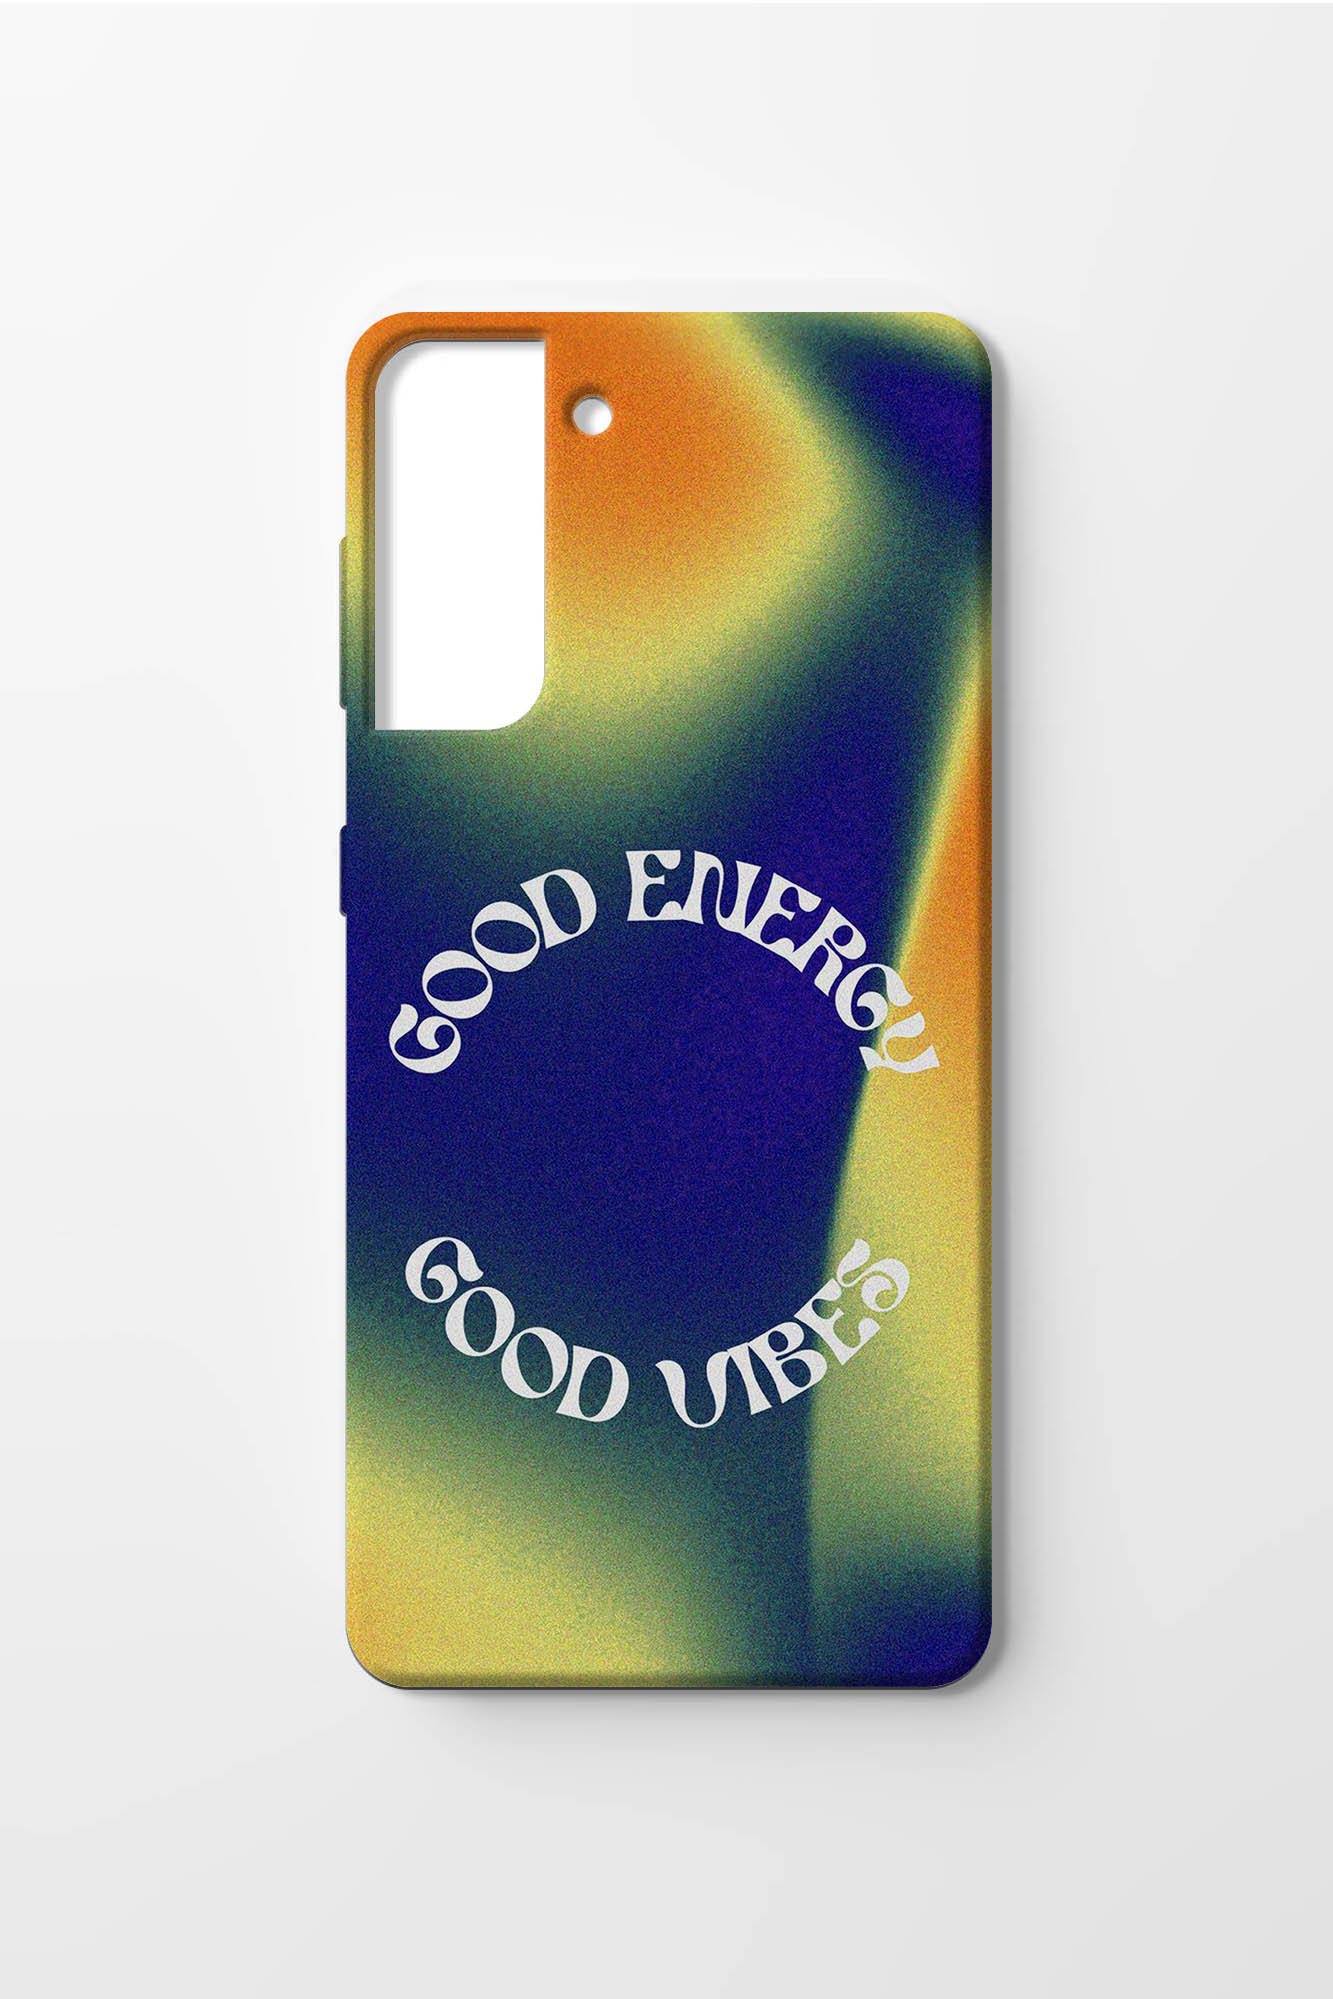 GOOD VIBES Android Case